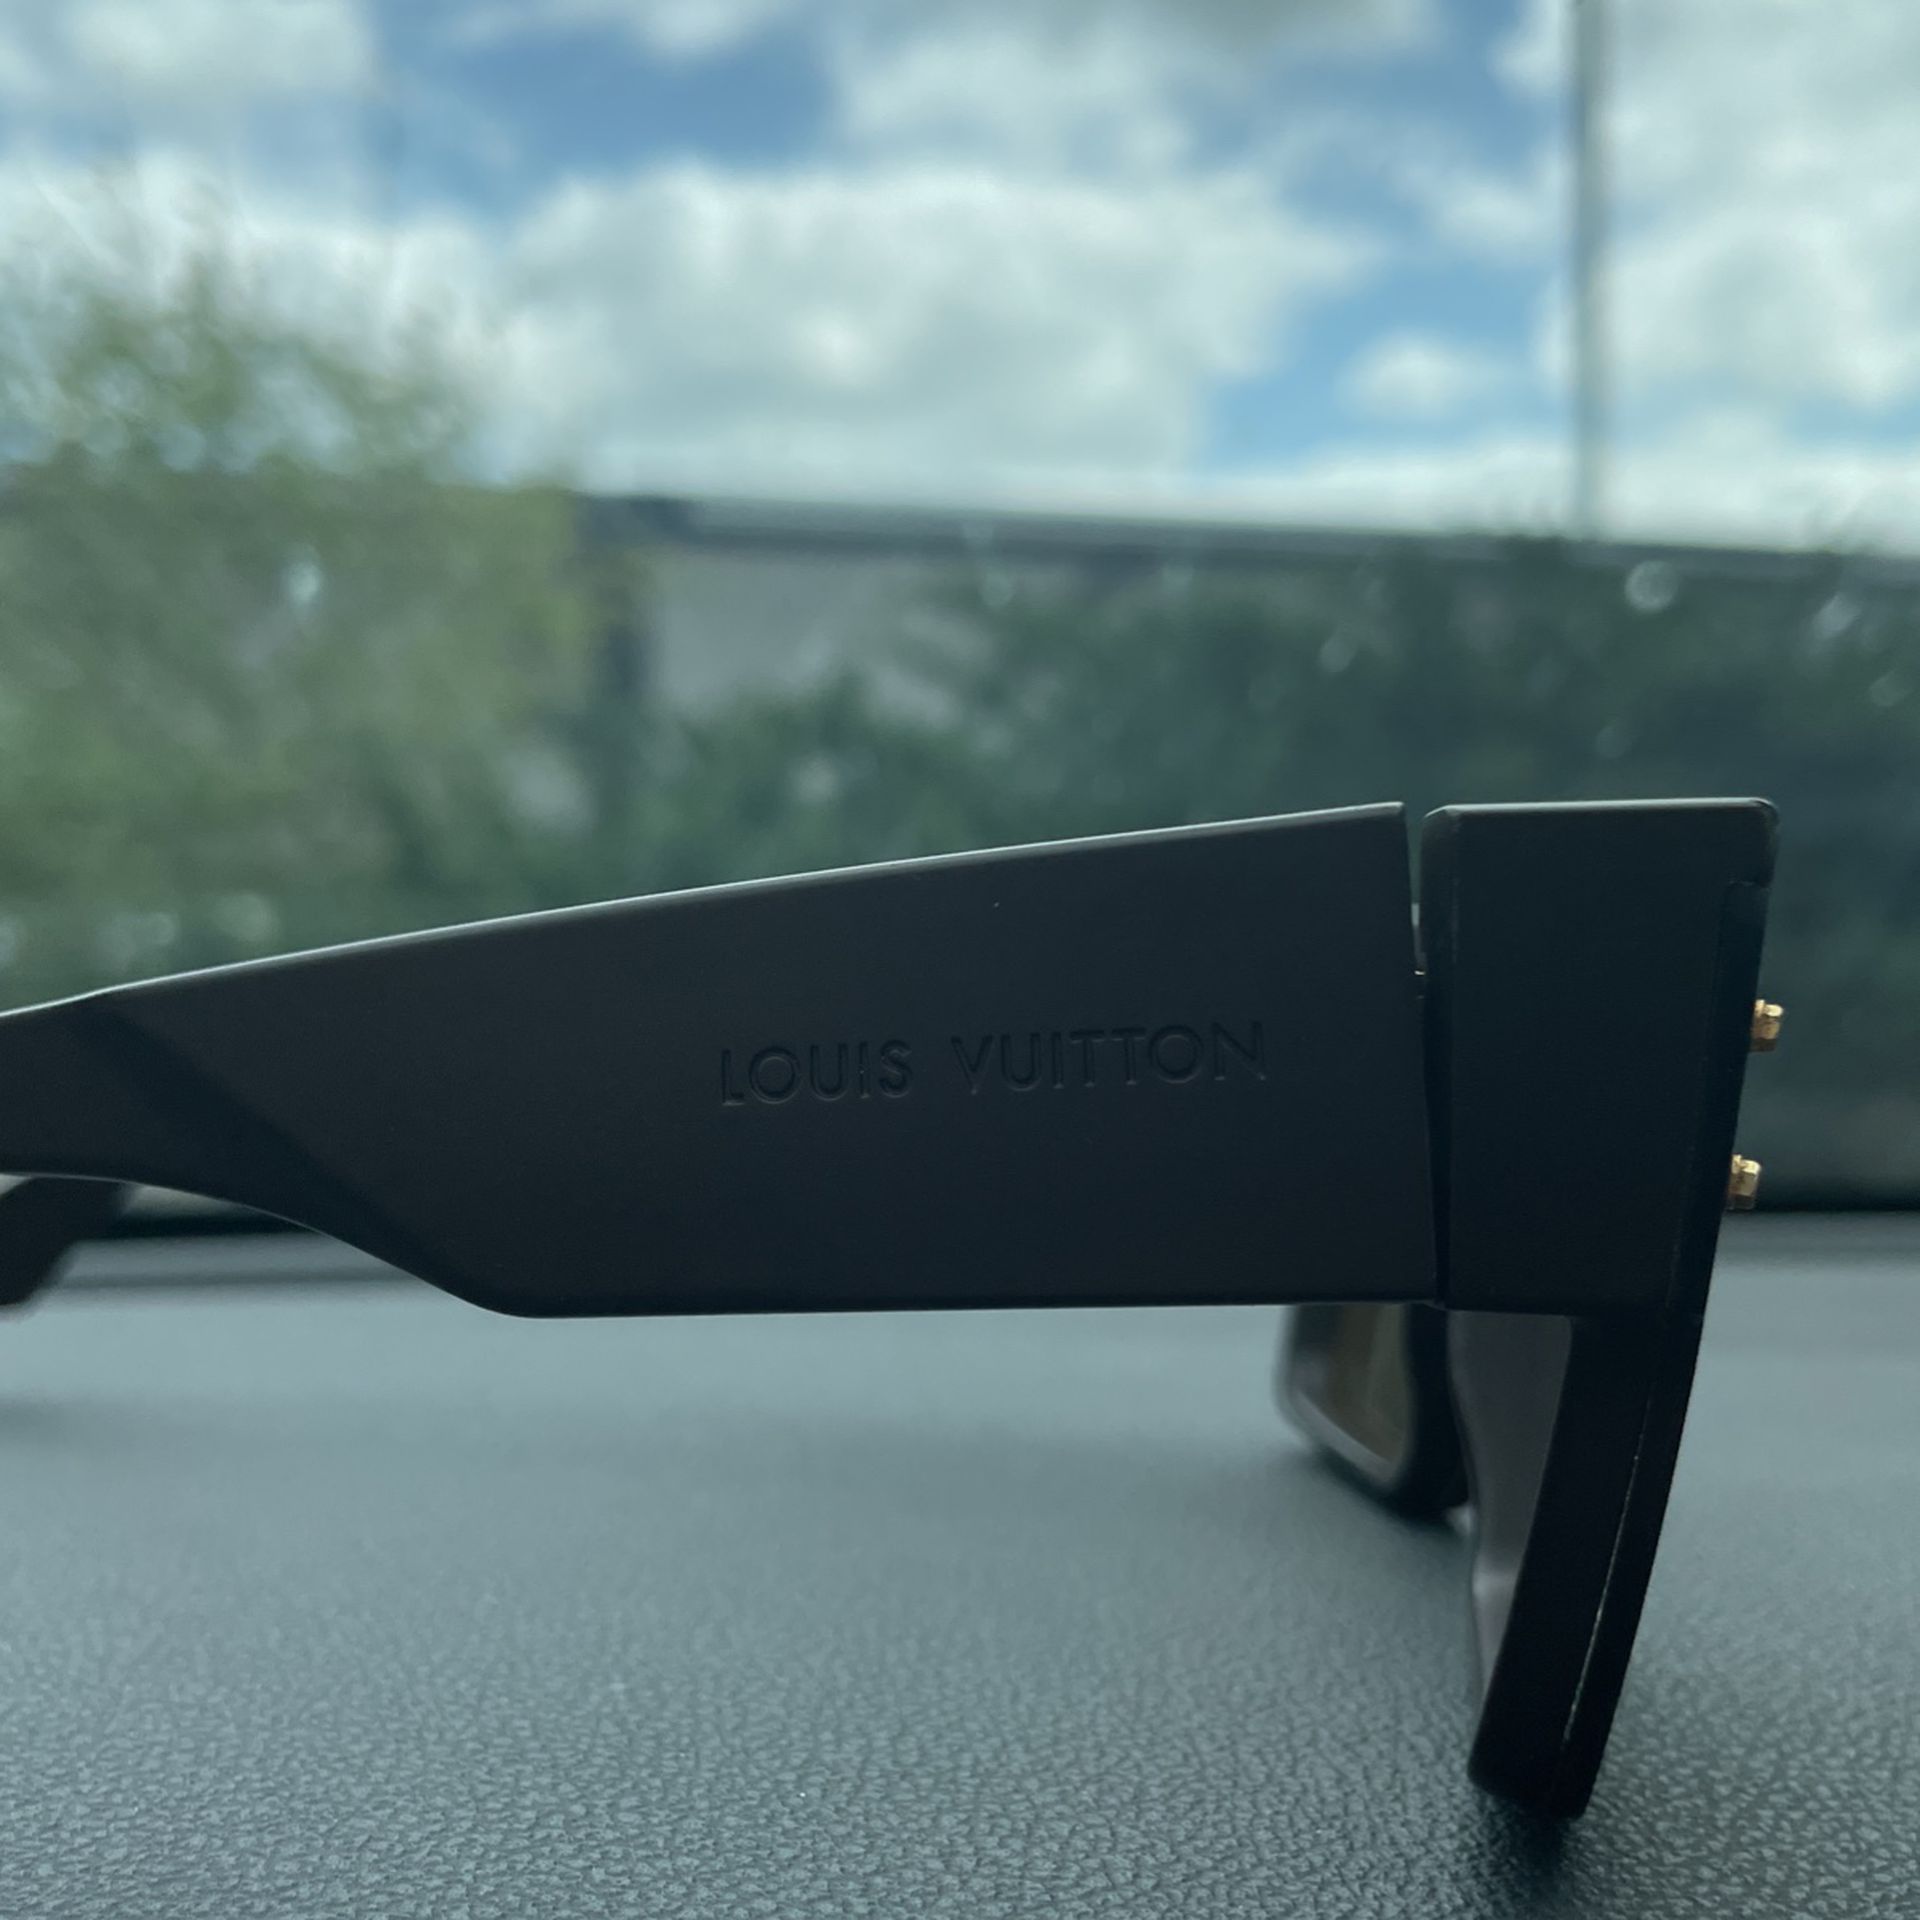 Louis Vuitton Sunglasses for Sale in Frisco, TX - OfferUp